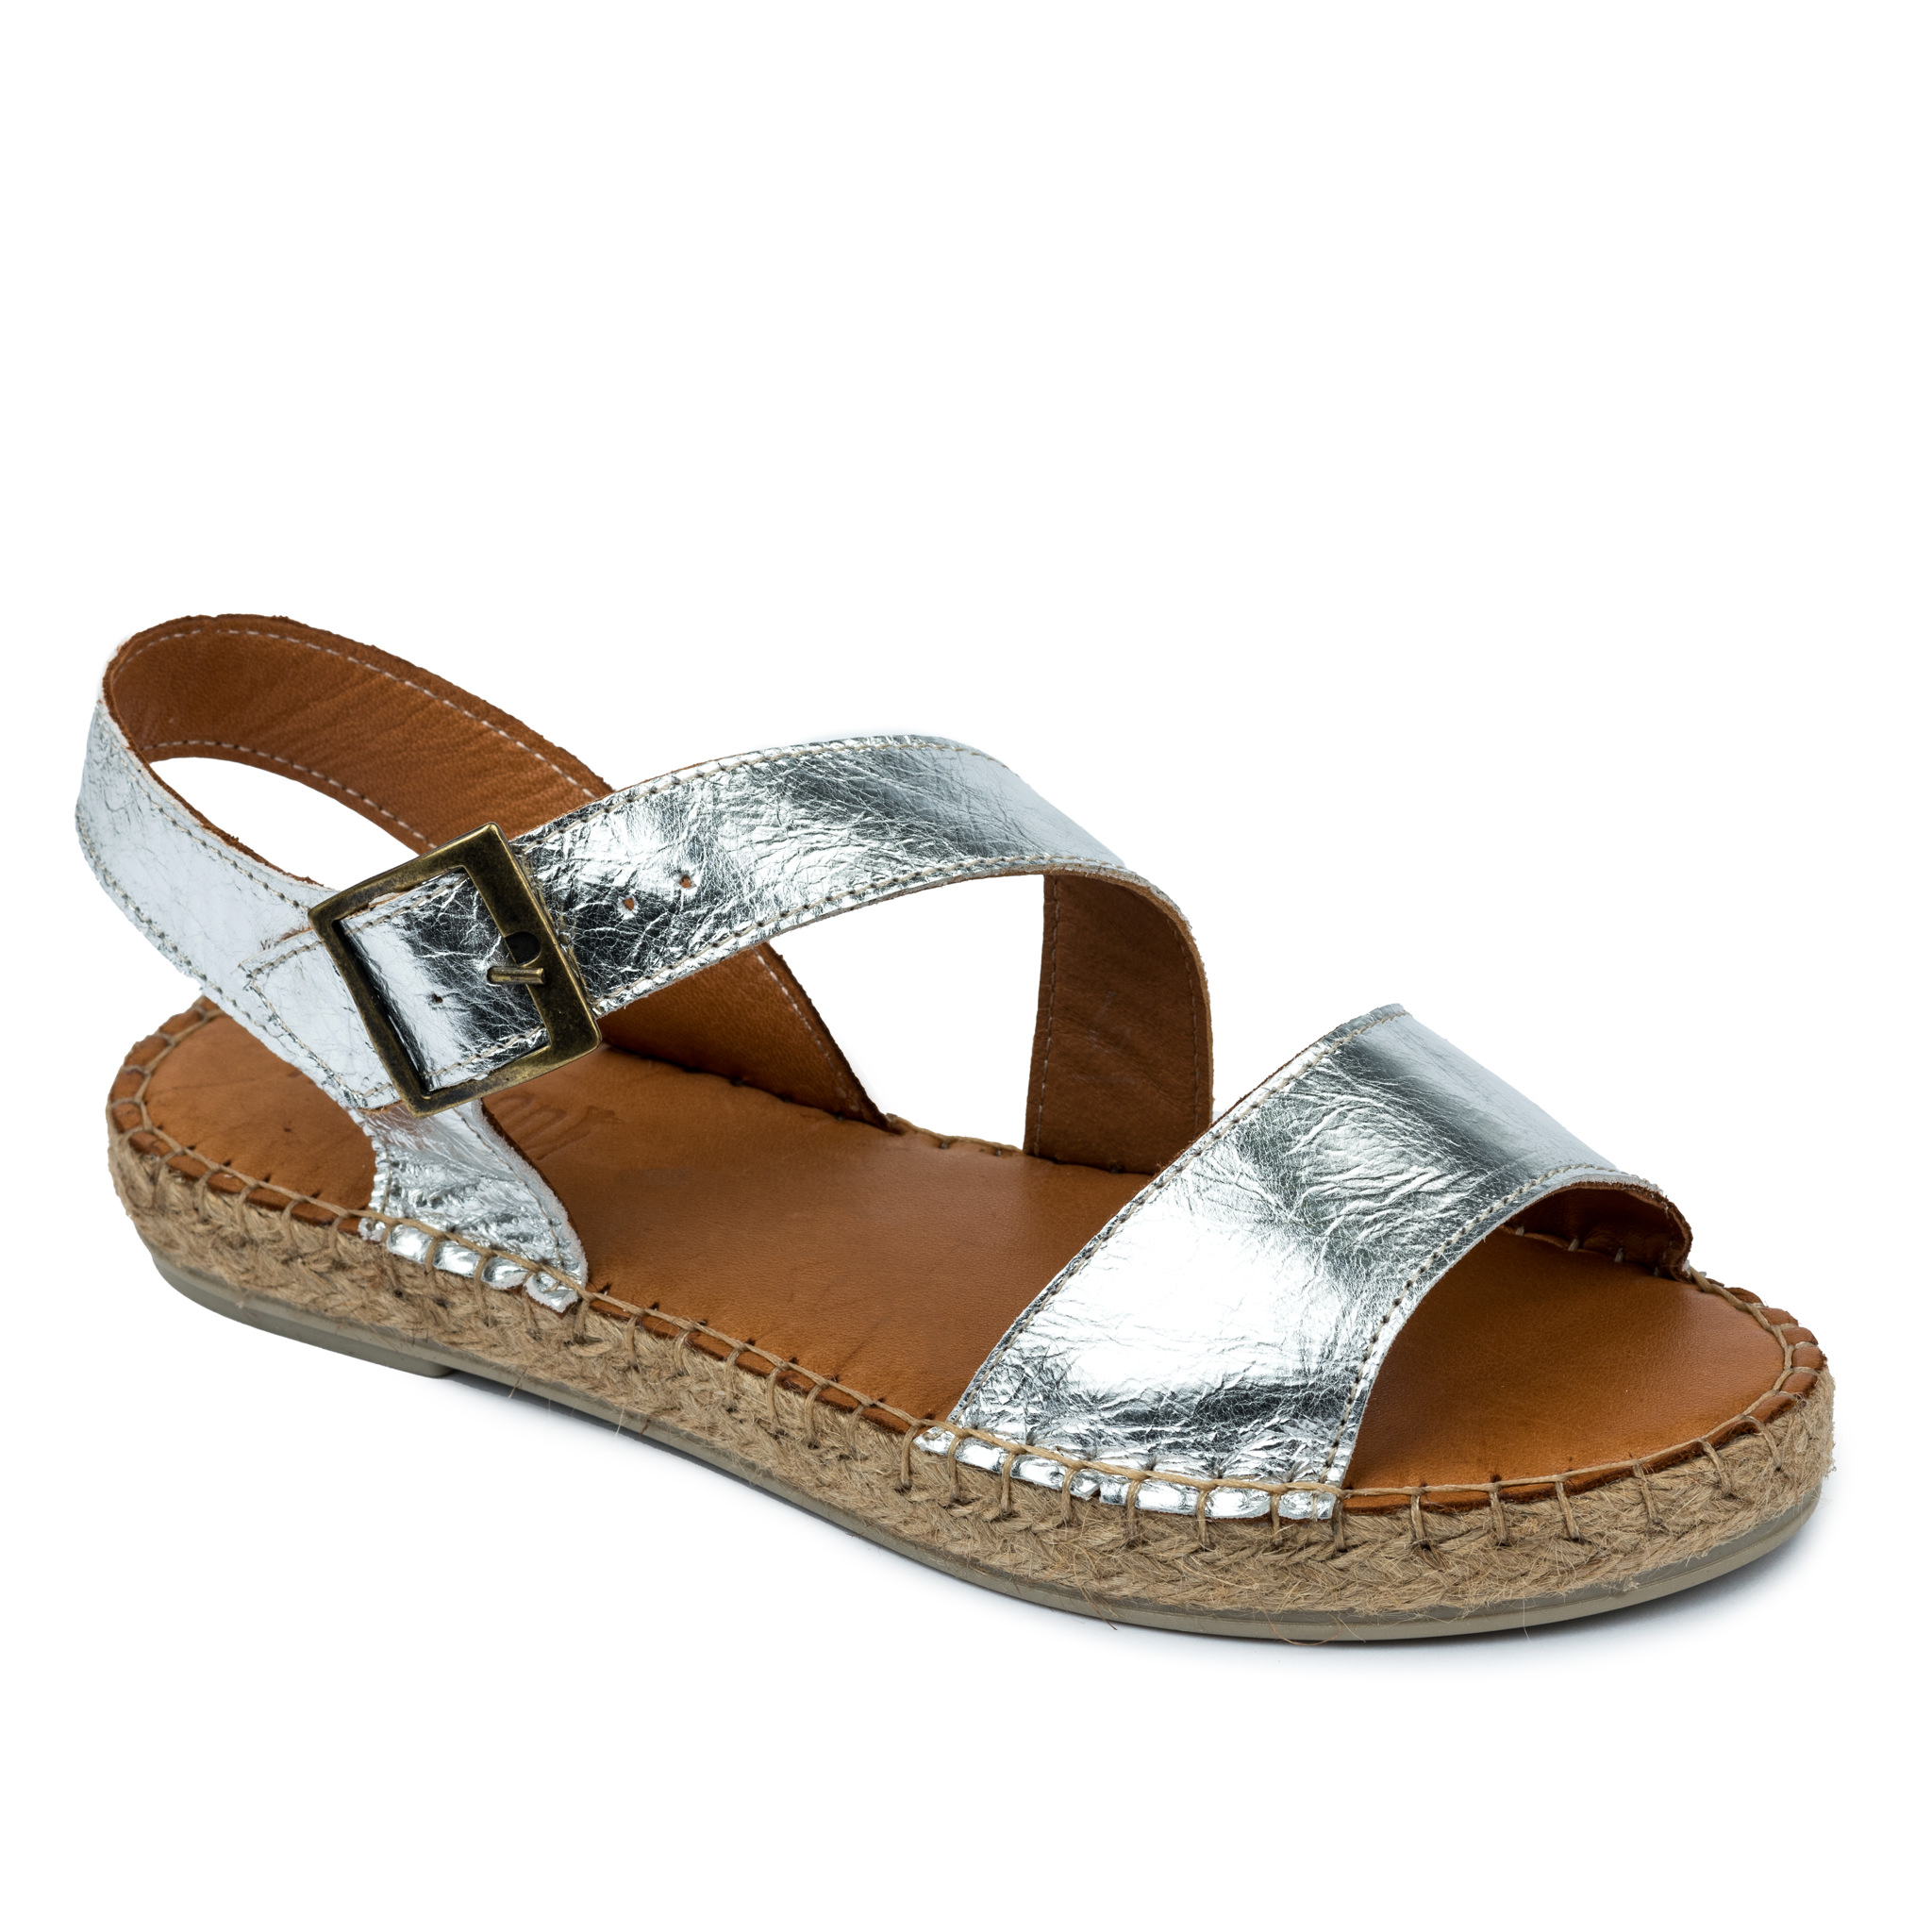 Leather espadrilles A589 - SILVER